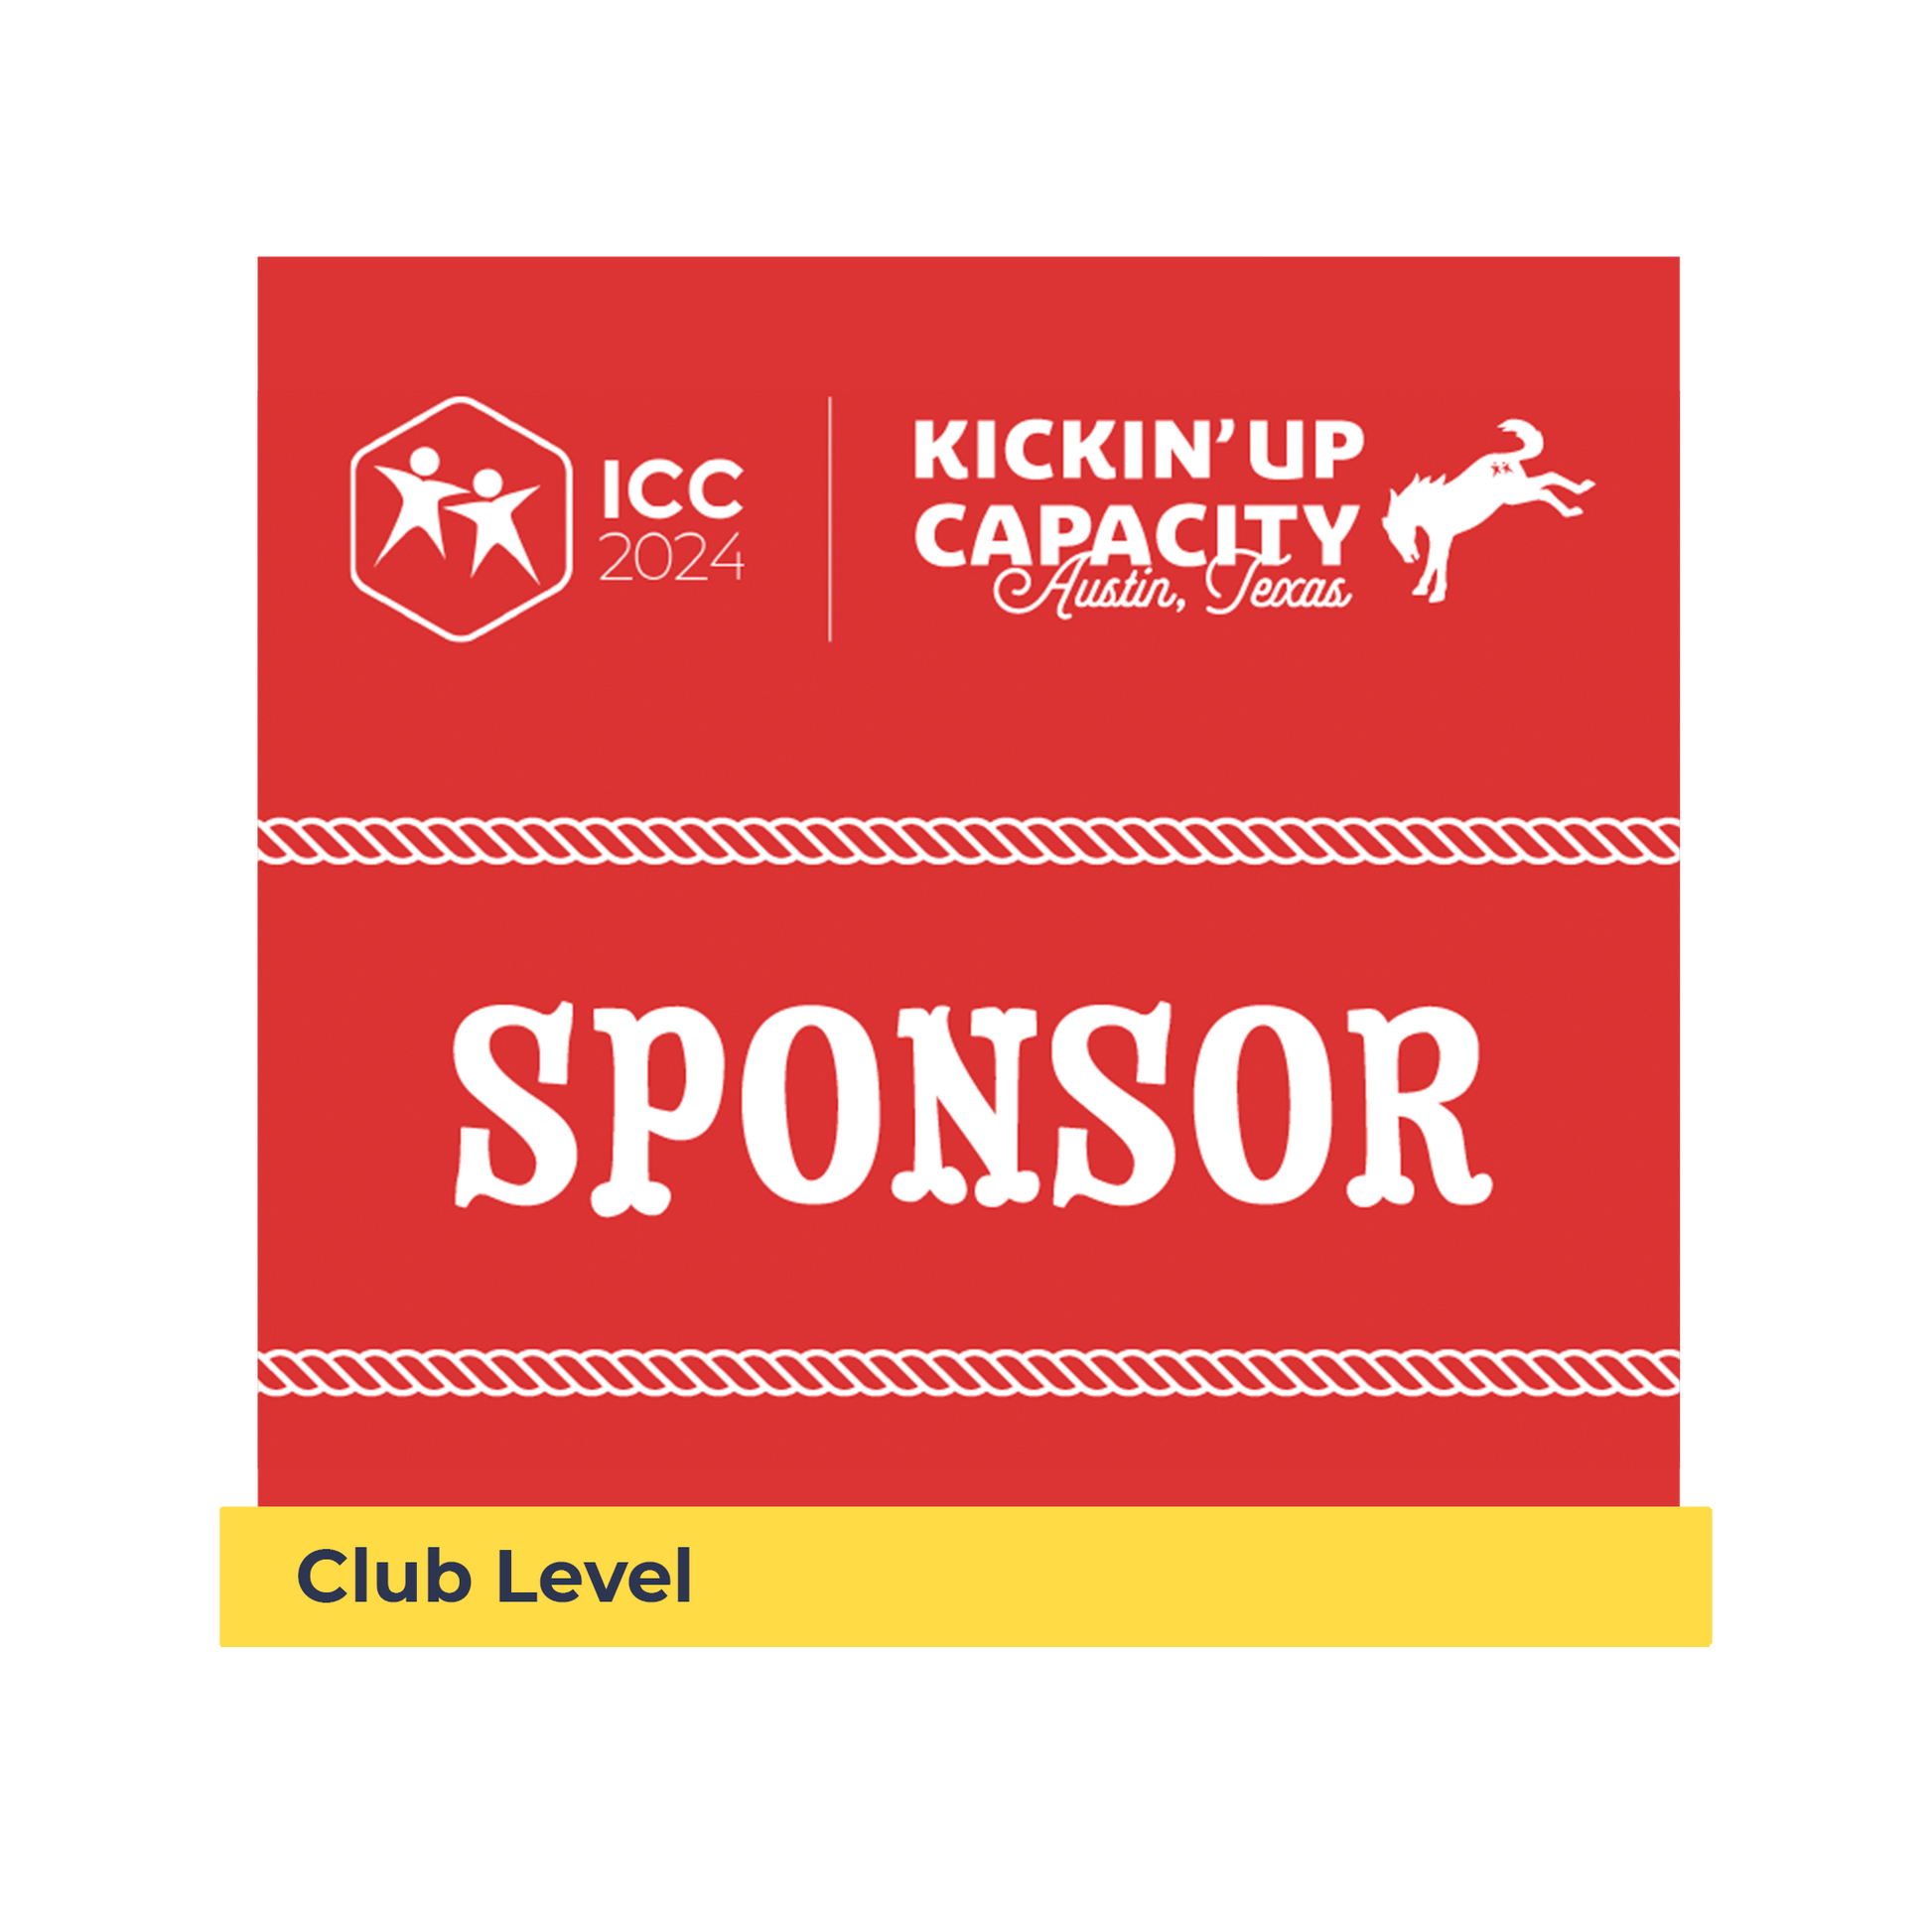 White logo on a red background for ICC 2024 with text about the sponsor opportunity with a horse graphic kicking it's hind legs up.